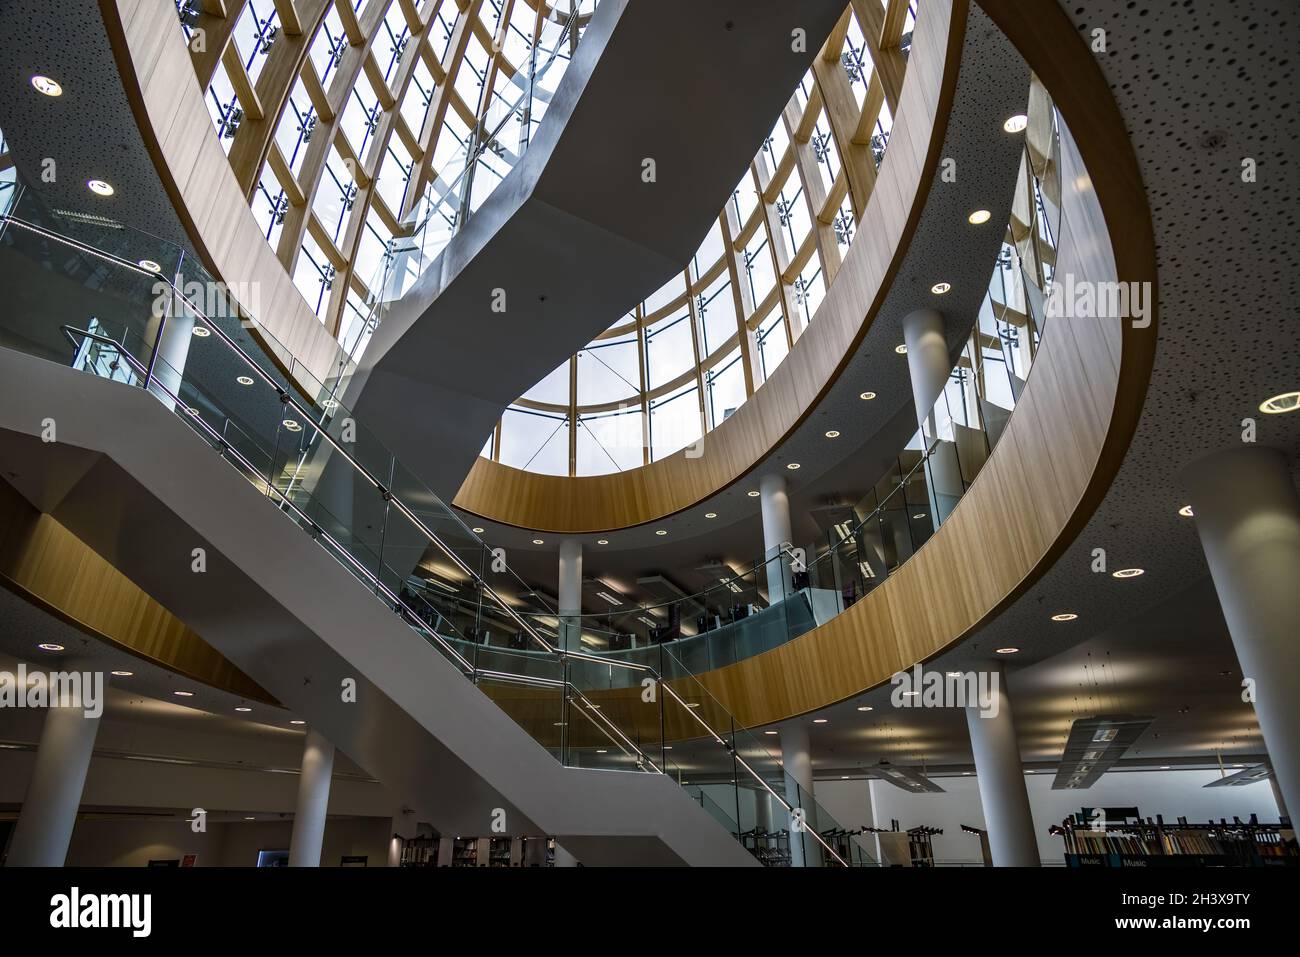 LIVERPOOL, UK - LUGLIO 14 : Interior view of the Central Library in Liverpool, England UK on Luglio 14, 2021 Foto Stock